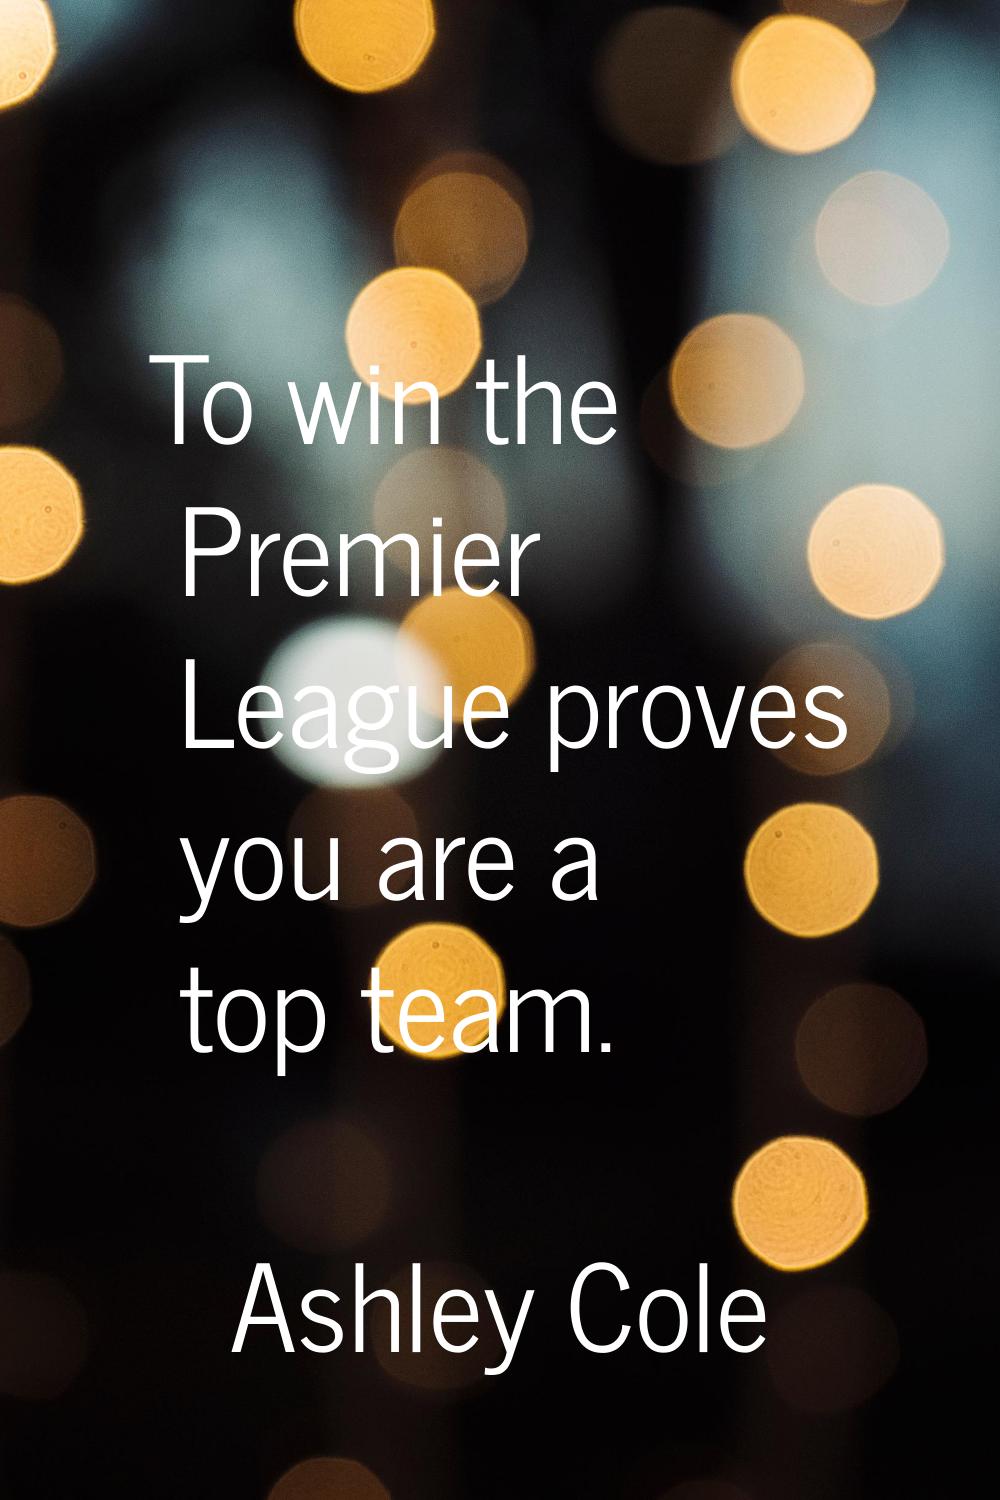 To win the Premier League proves you are a top team.